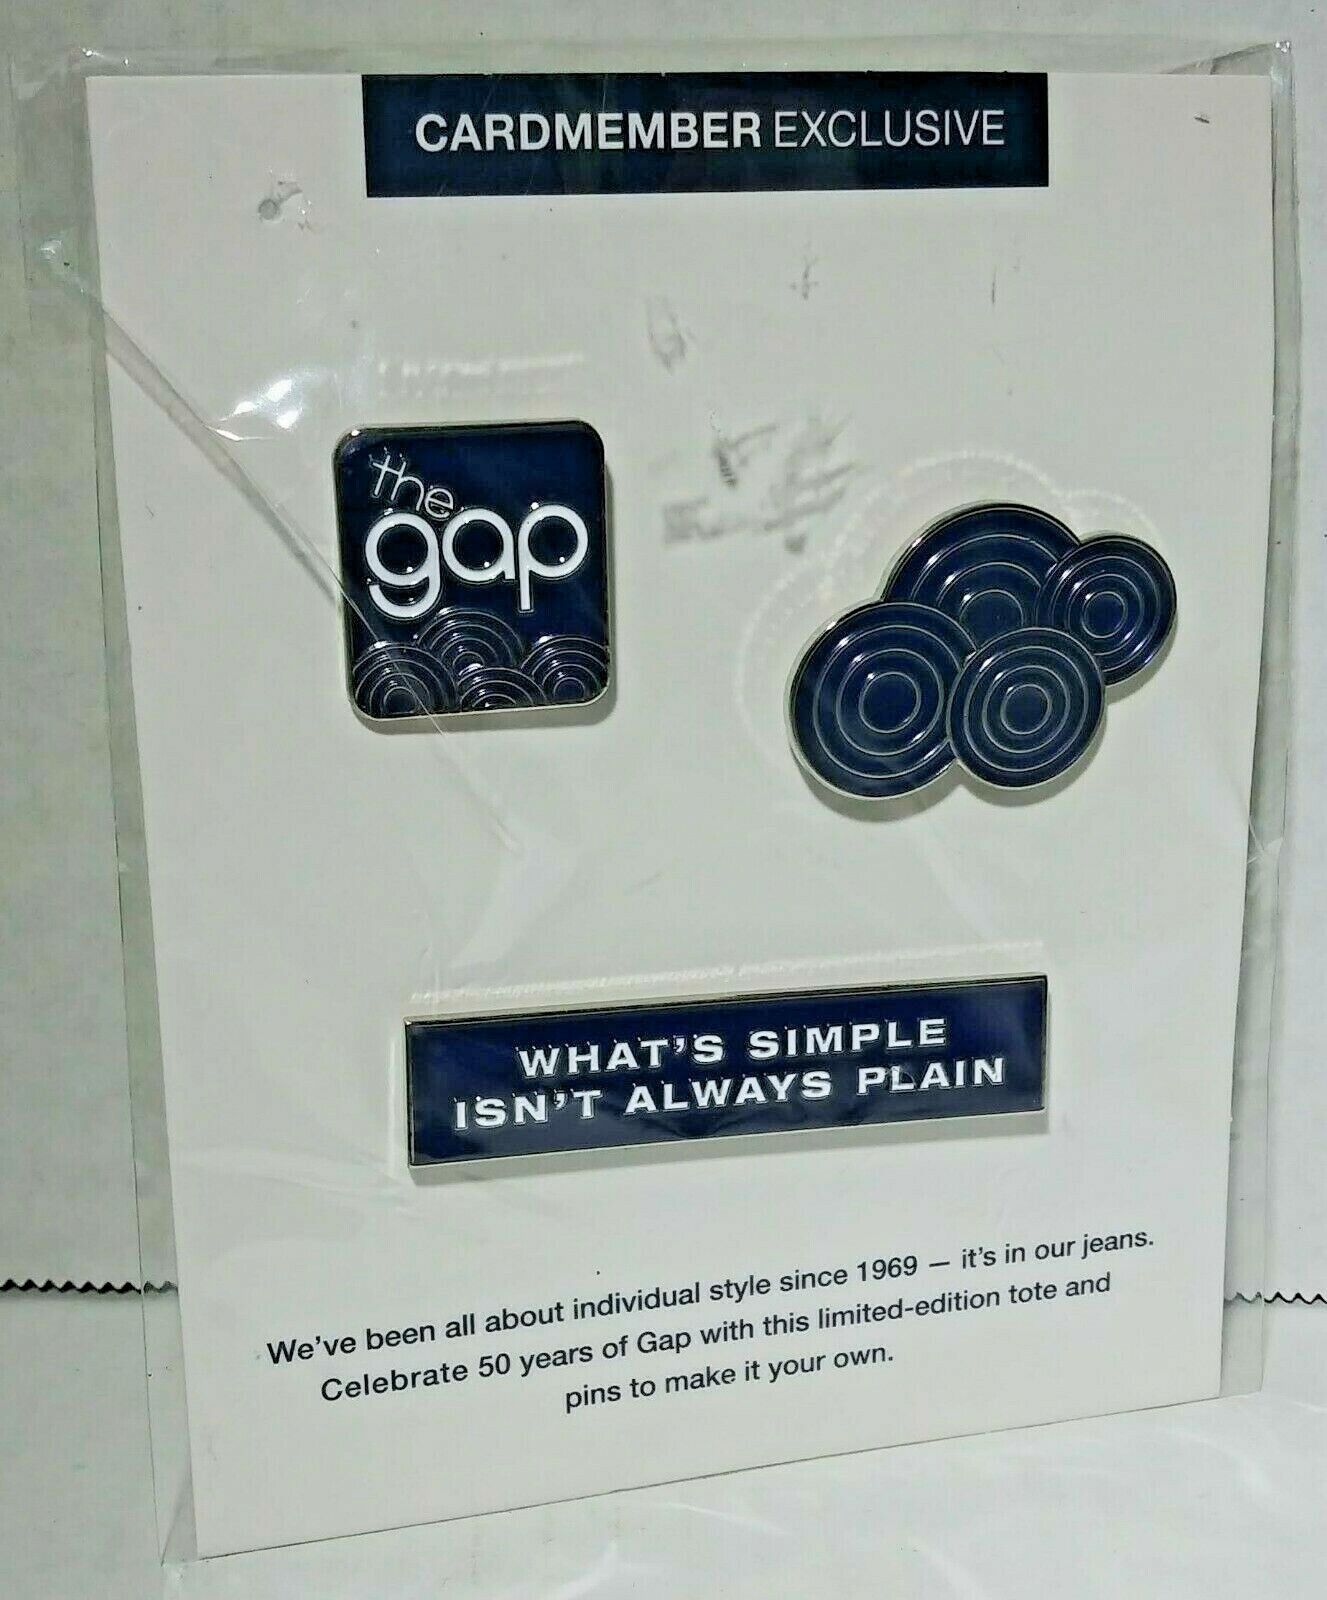 New in Package The Gap Card Member Exclusive 50 Year Anniversary Pins Dark Blue